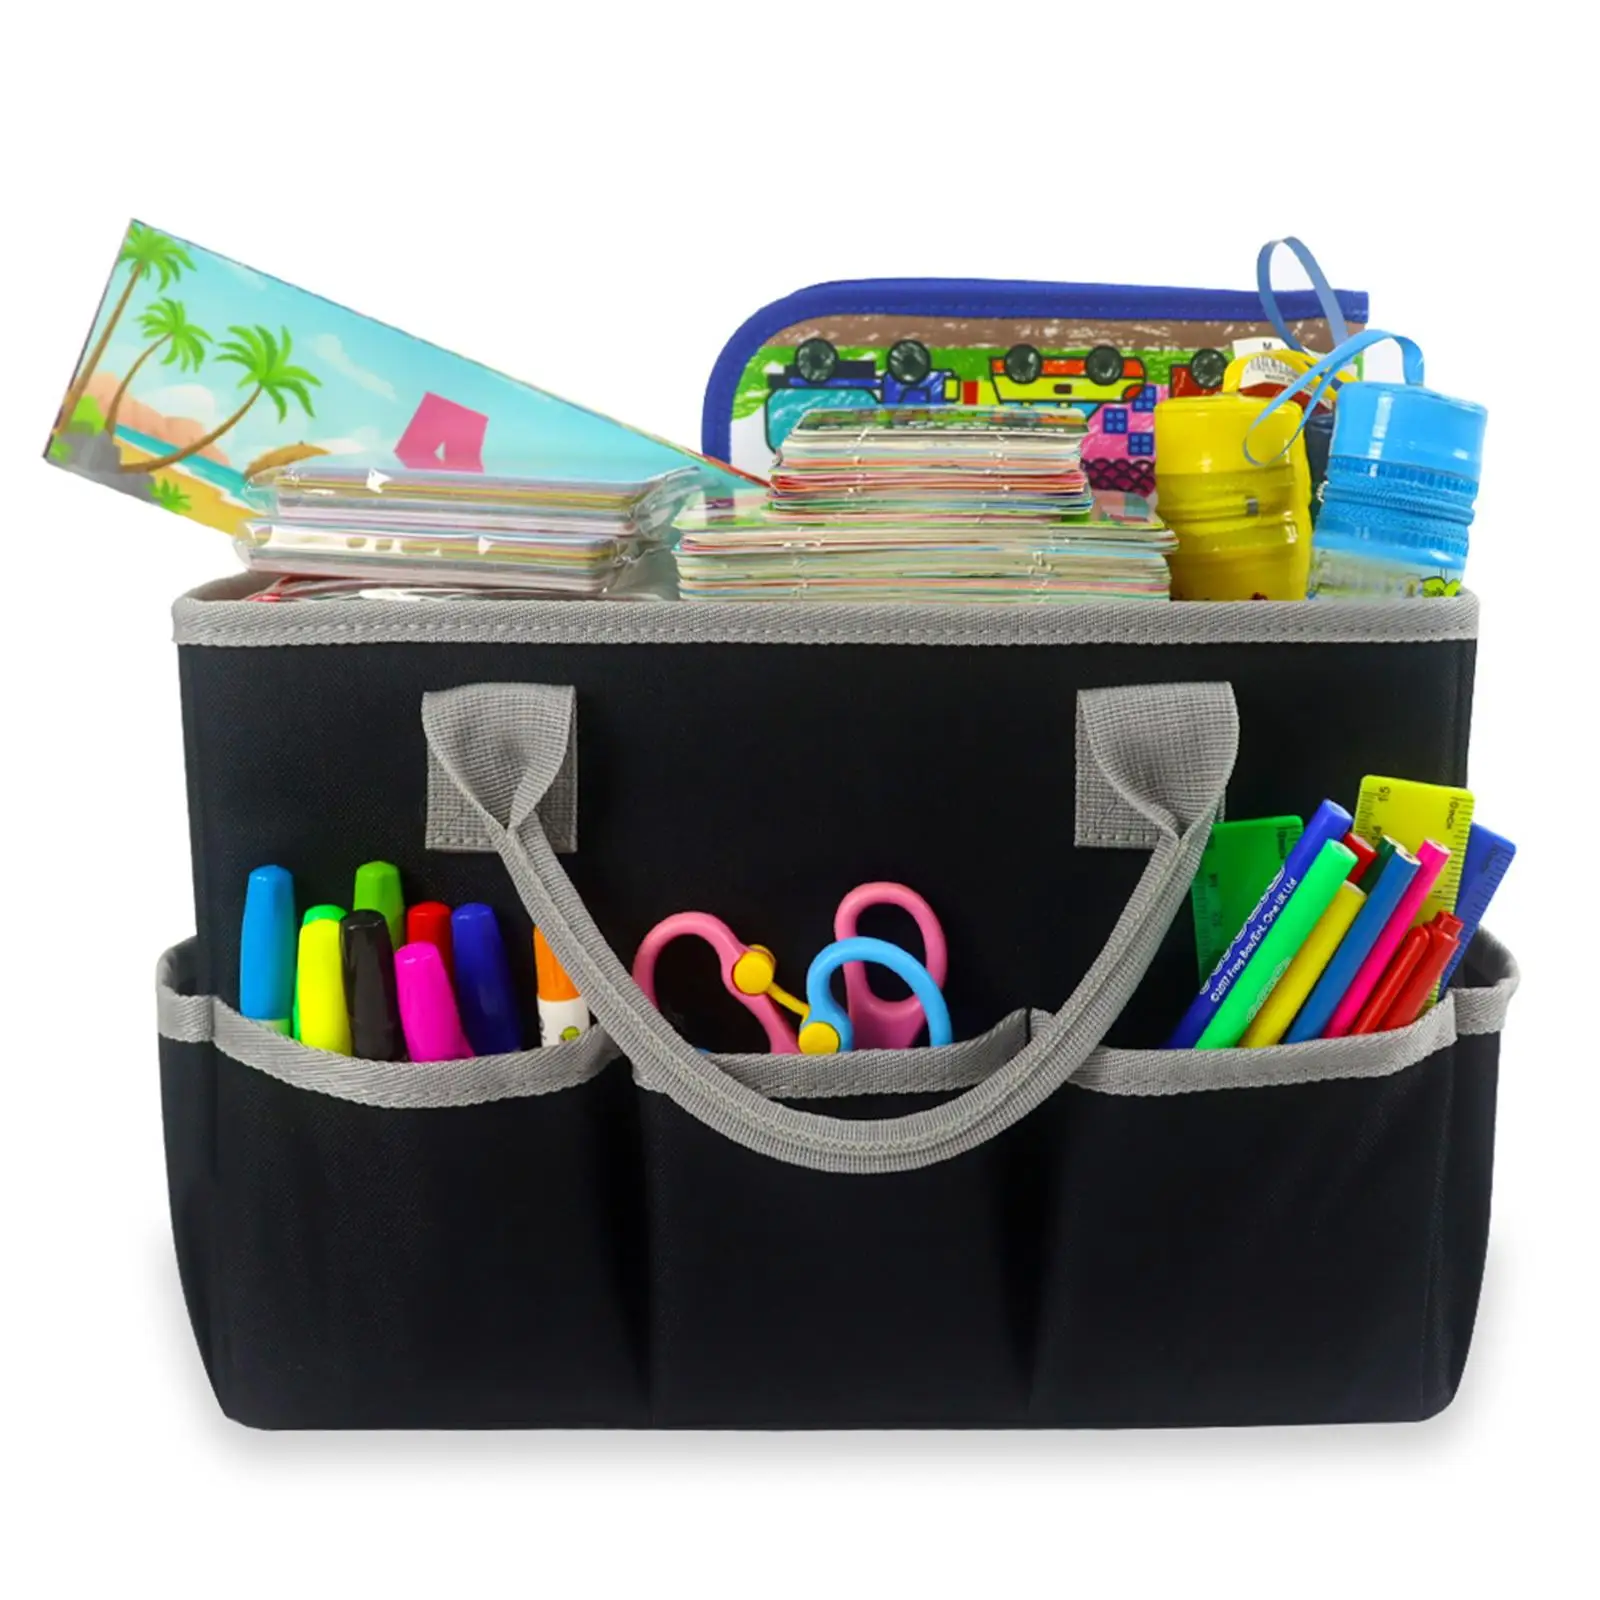 Craft Storage Tote Bag Portable Crafts Supply Carrier Storage Bag with Handles Large Scrapbook Carrying Case for Daily Use